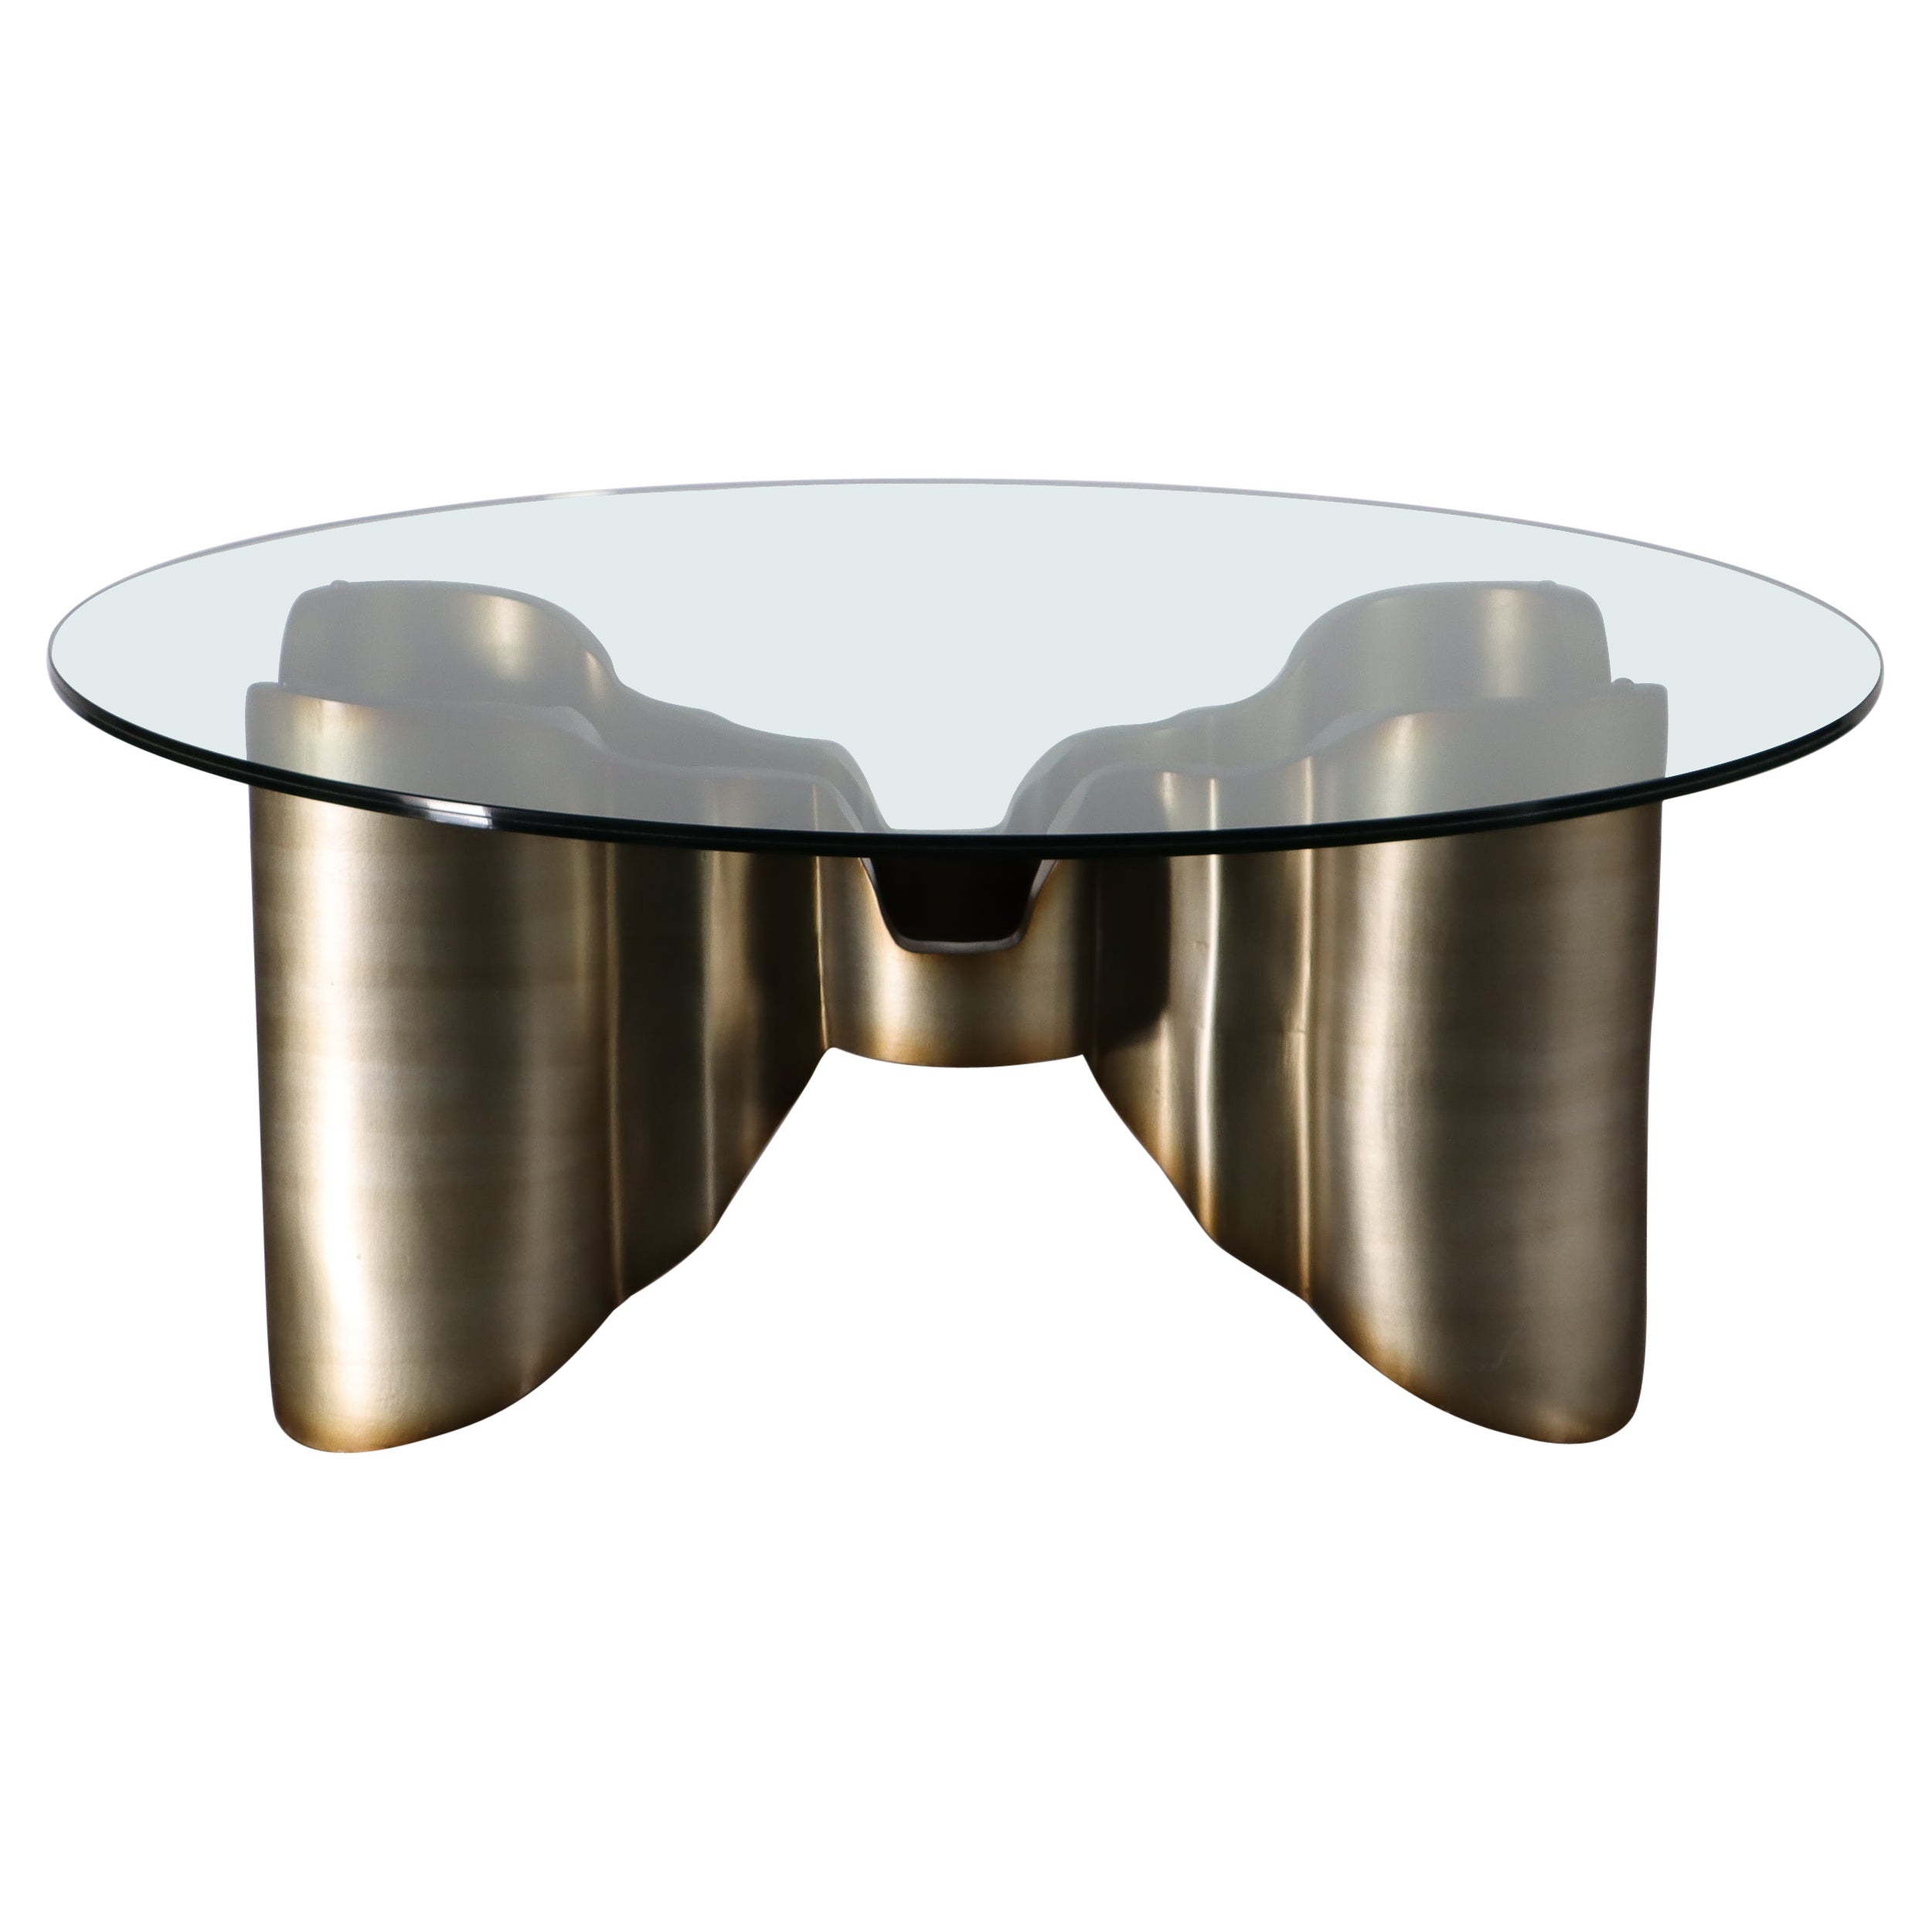 Sculptural Lacquered Wood & Glass Coffee Table by Costantini, Mariposa -in Stock For Sale